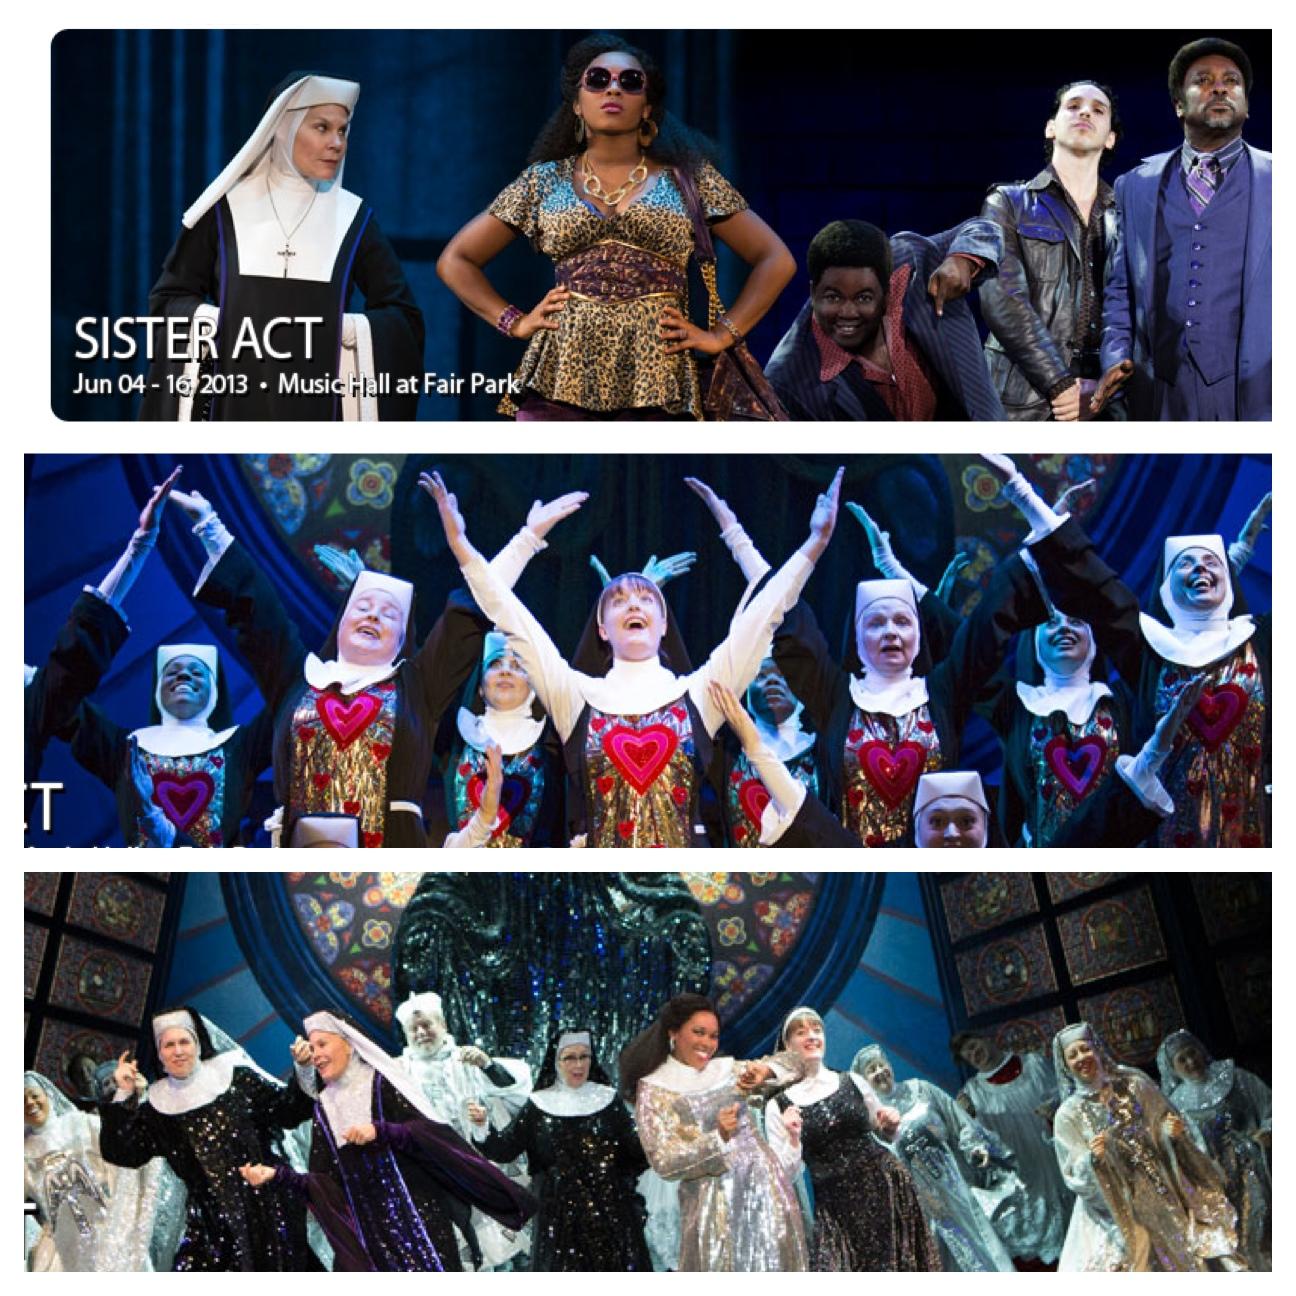 Dallas Summer Musicals rejoices with Sister Act